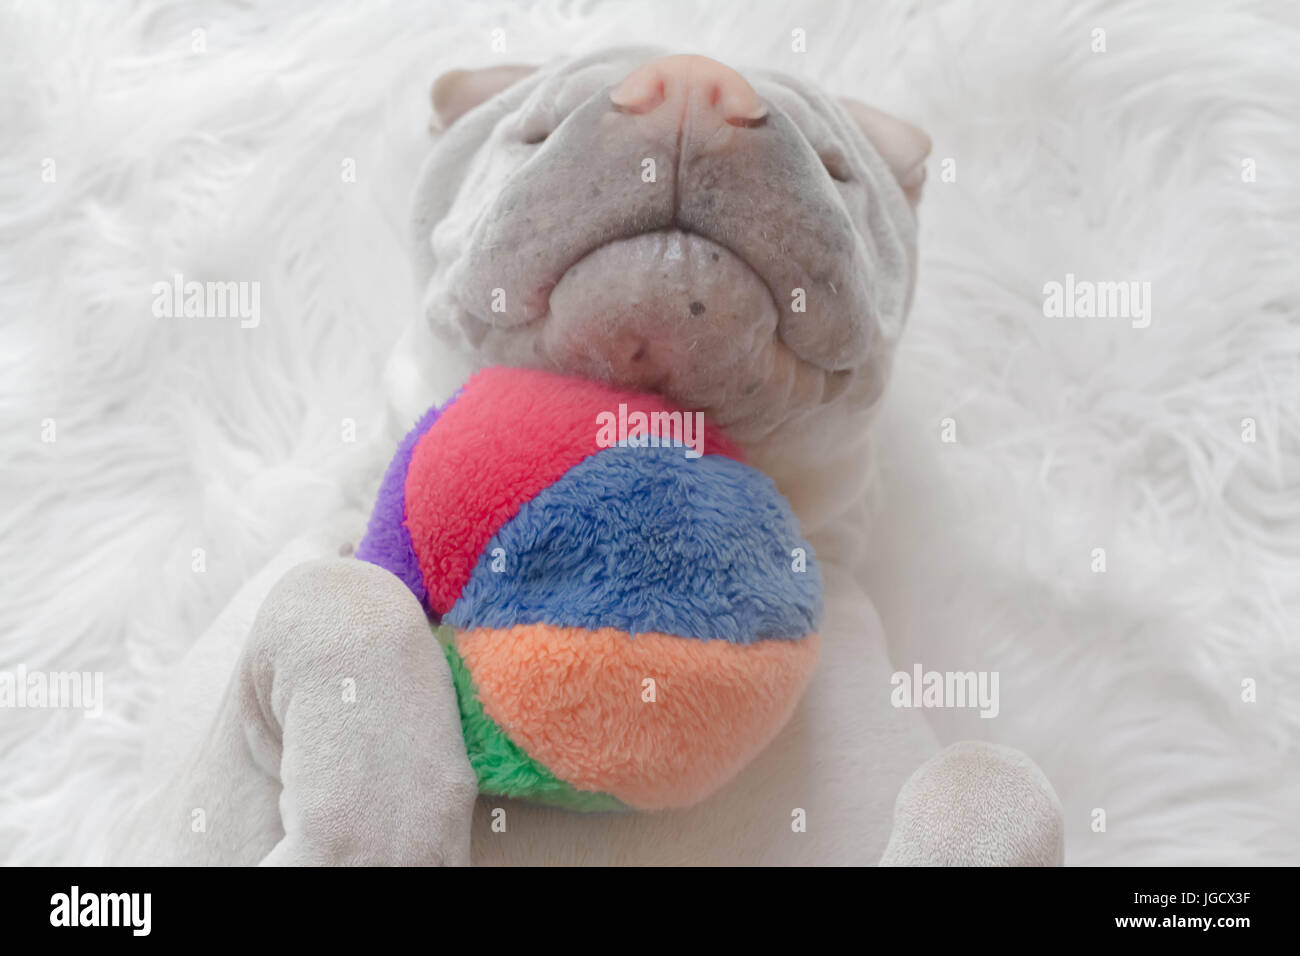 shar-pei dog lying on its back with a ball Stock Photo